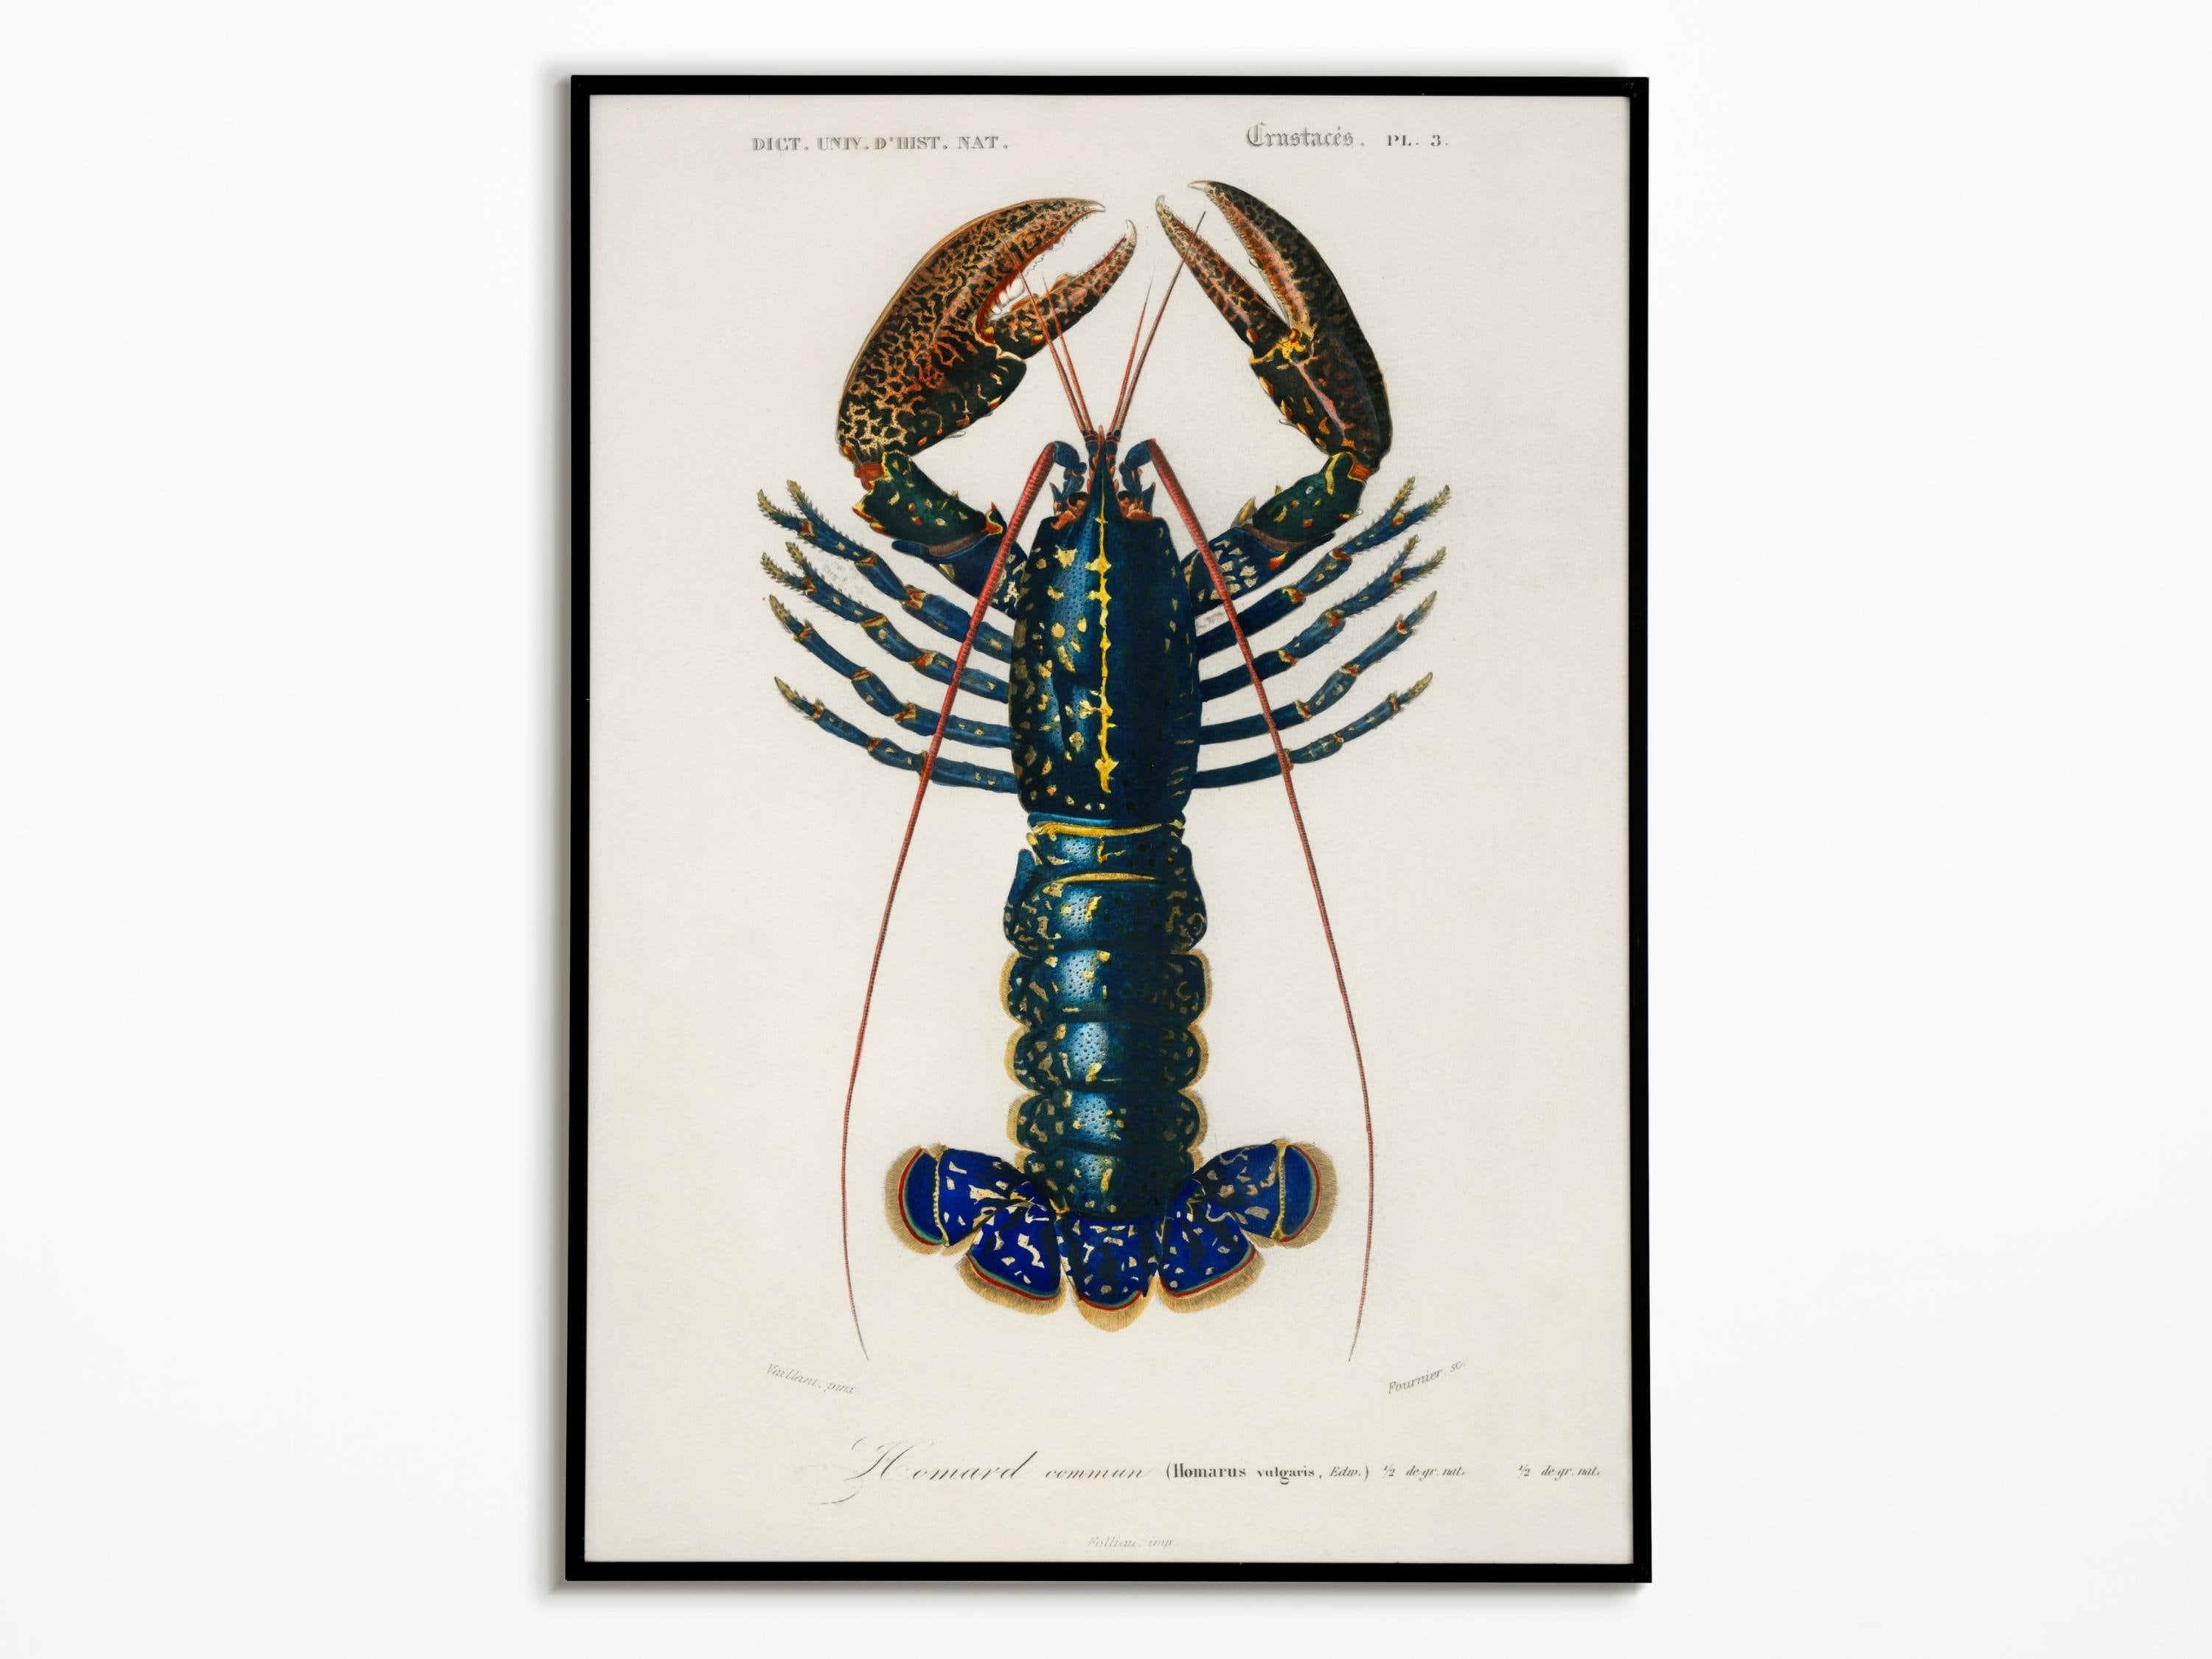 Gift Guide: For Her (Under $100) - West Coast Lobster